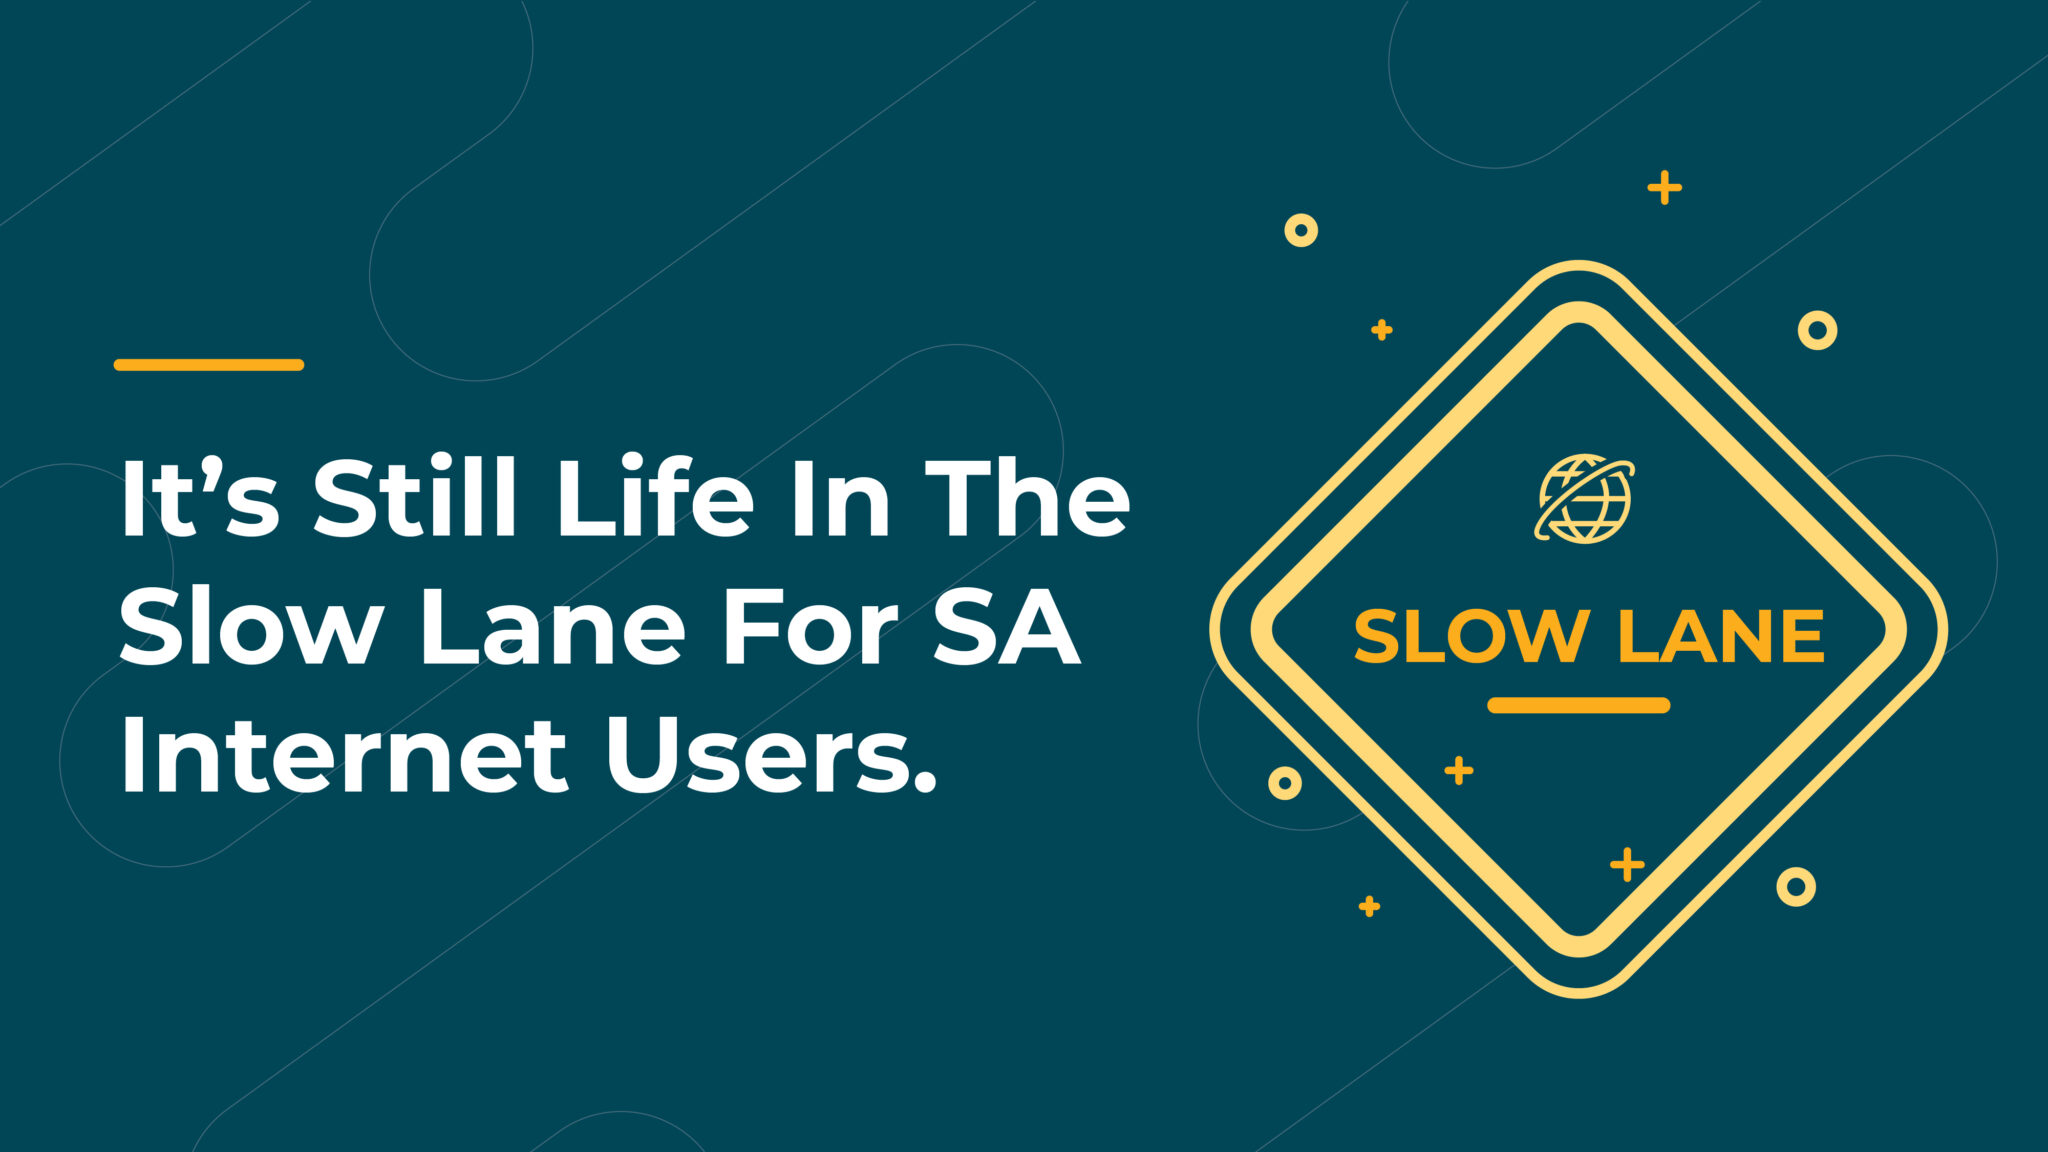 It’s still life in the slow lane for SA internet users